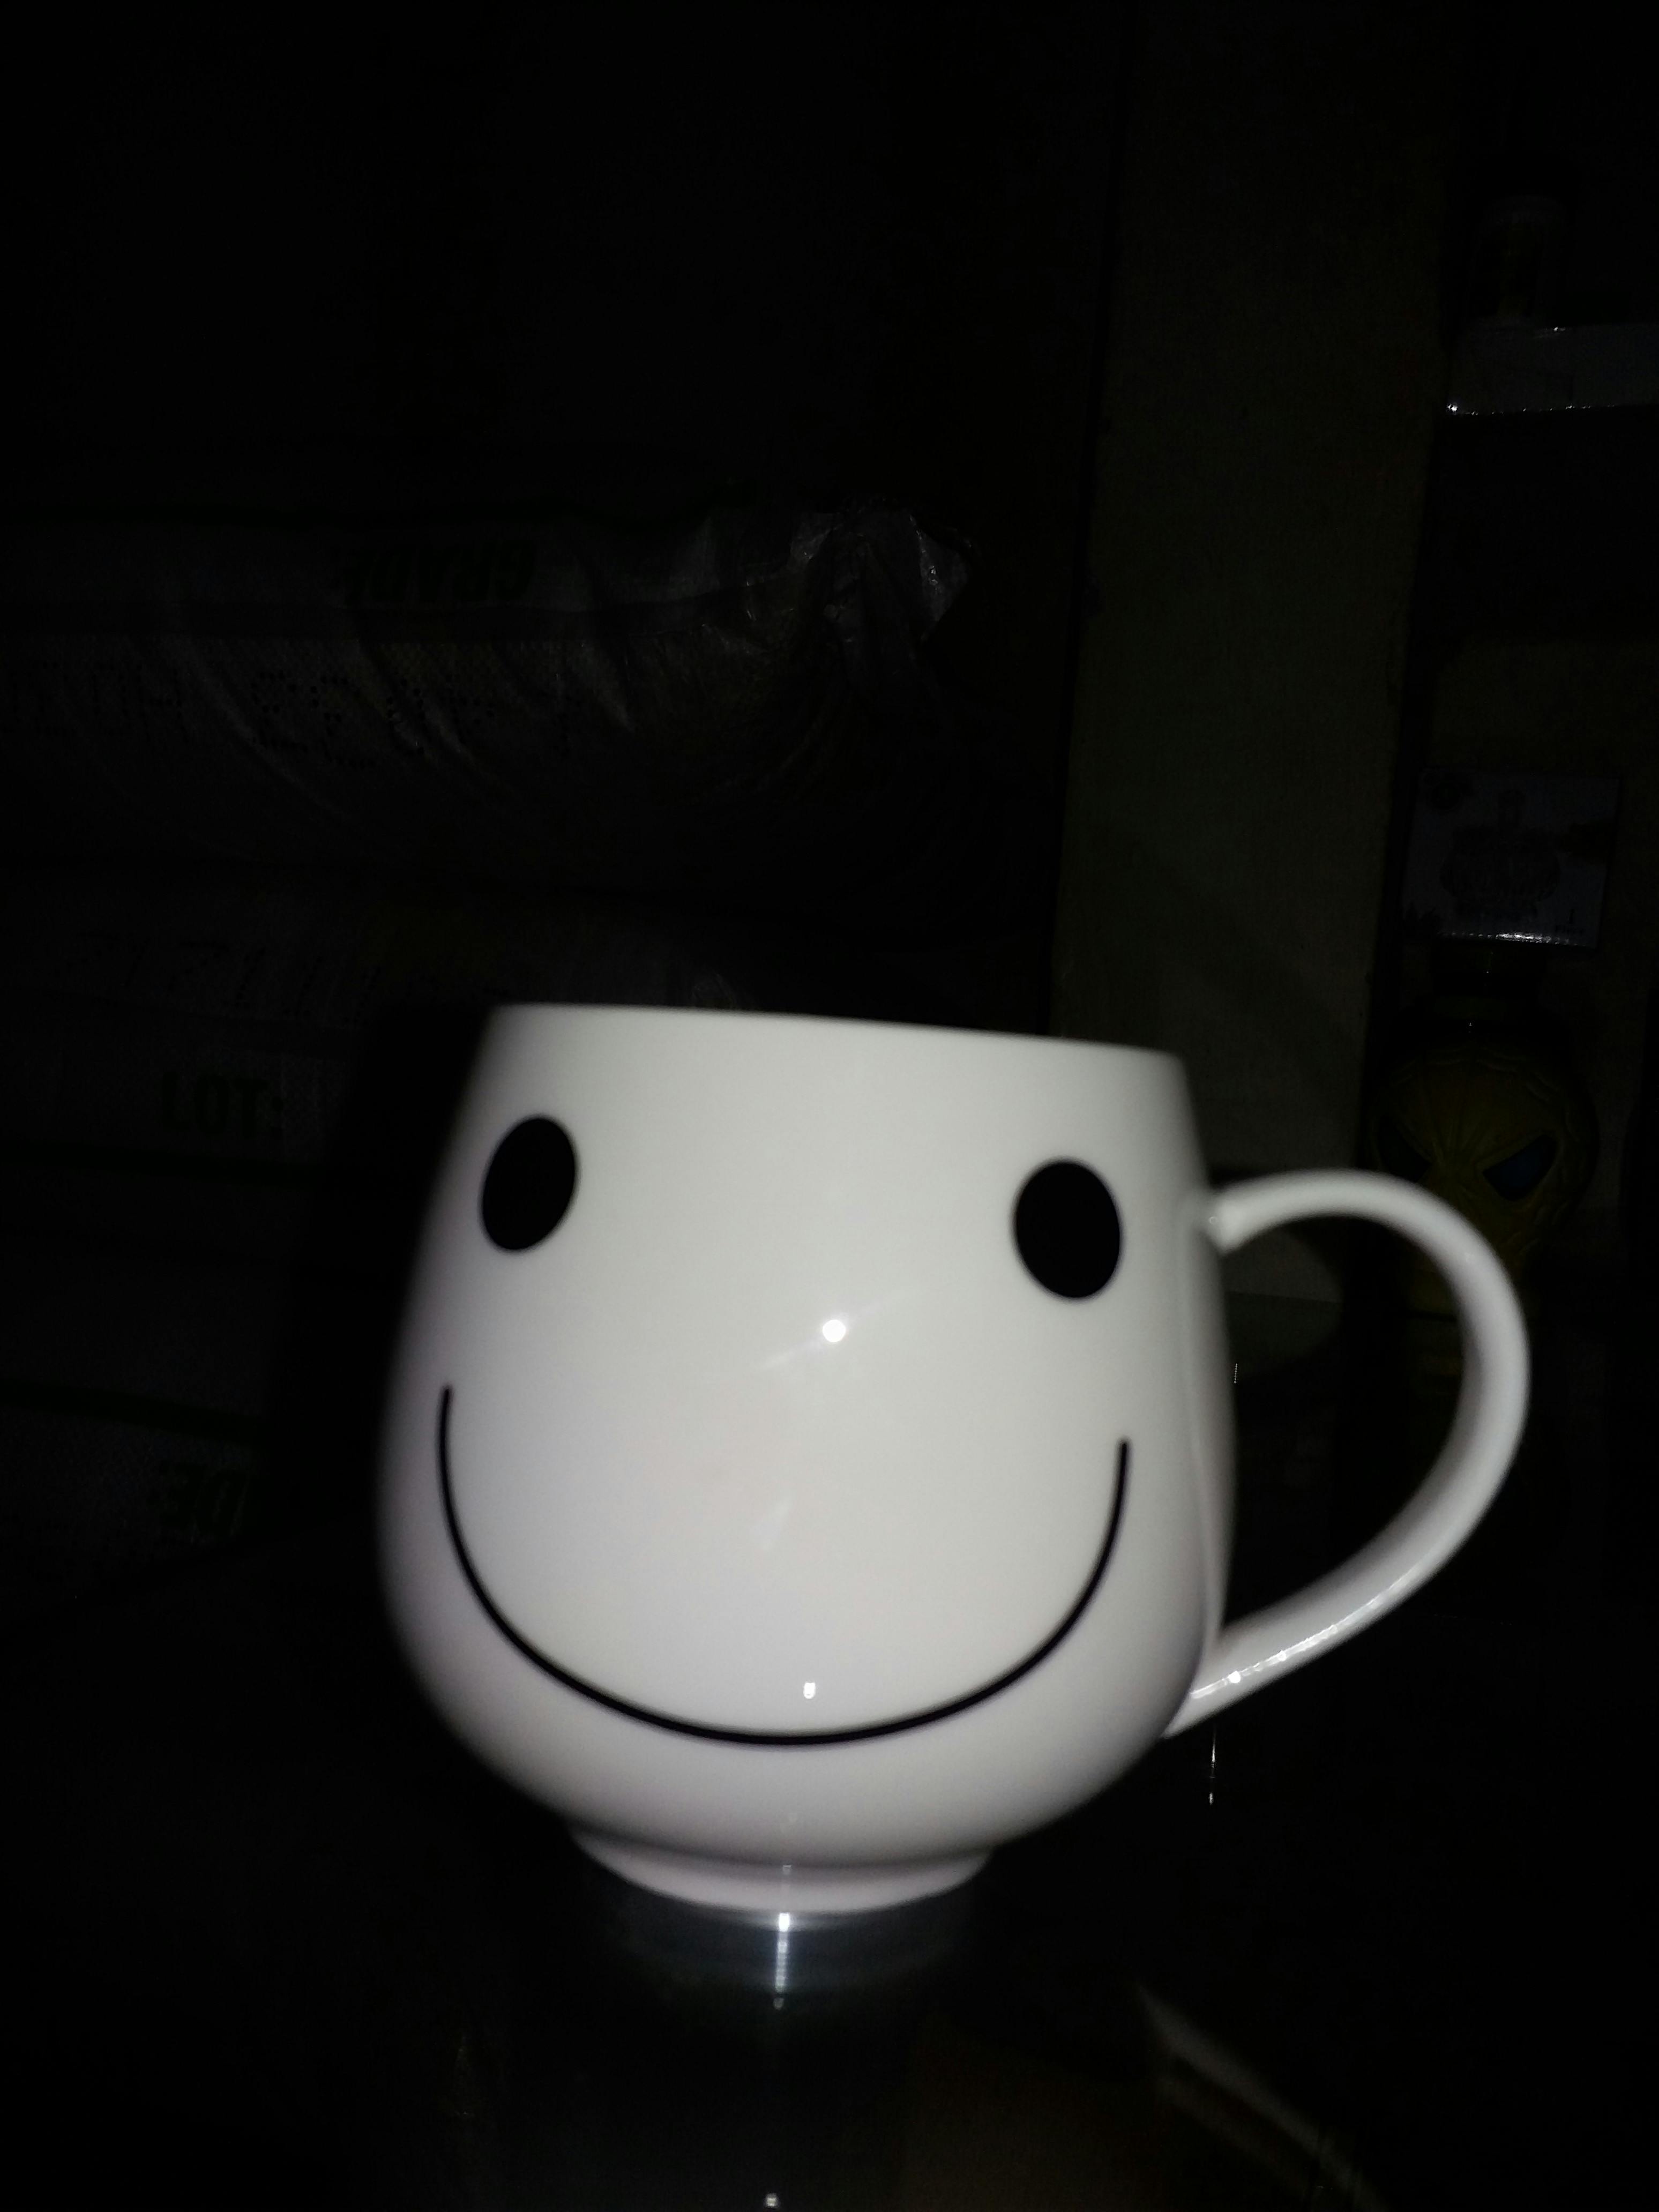 Free stock photo of Ceramic cup Made with smile